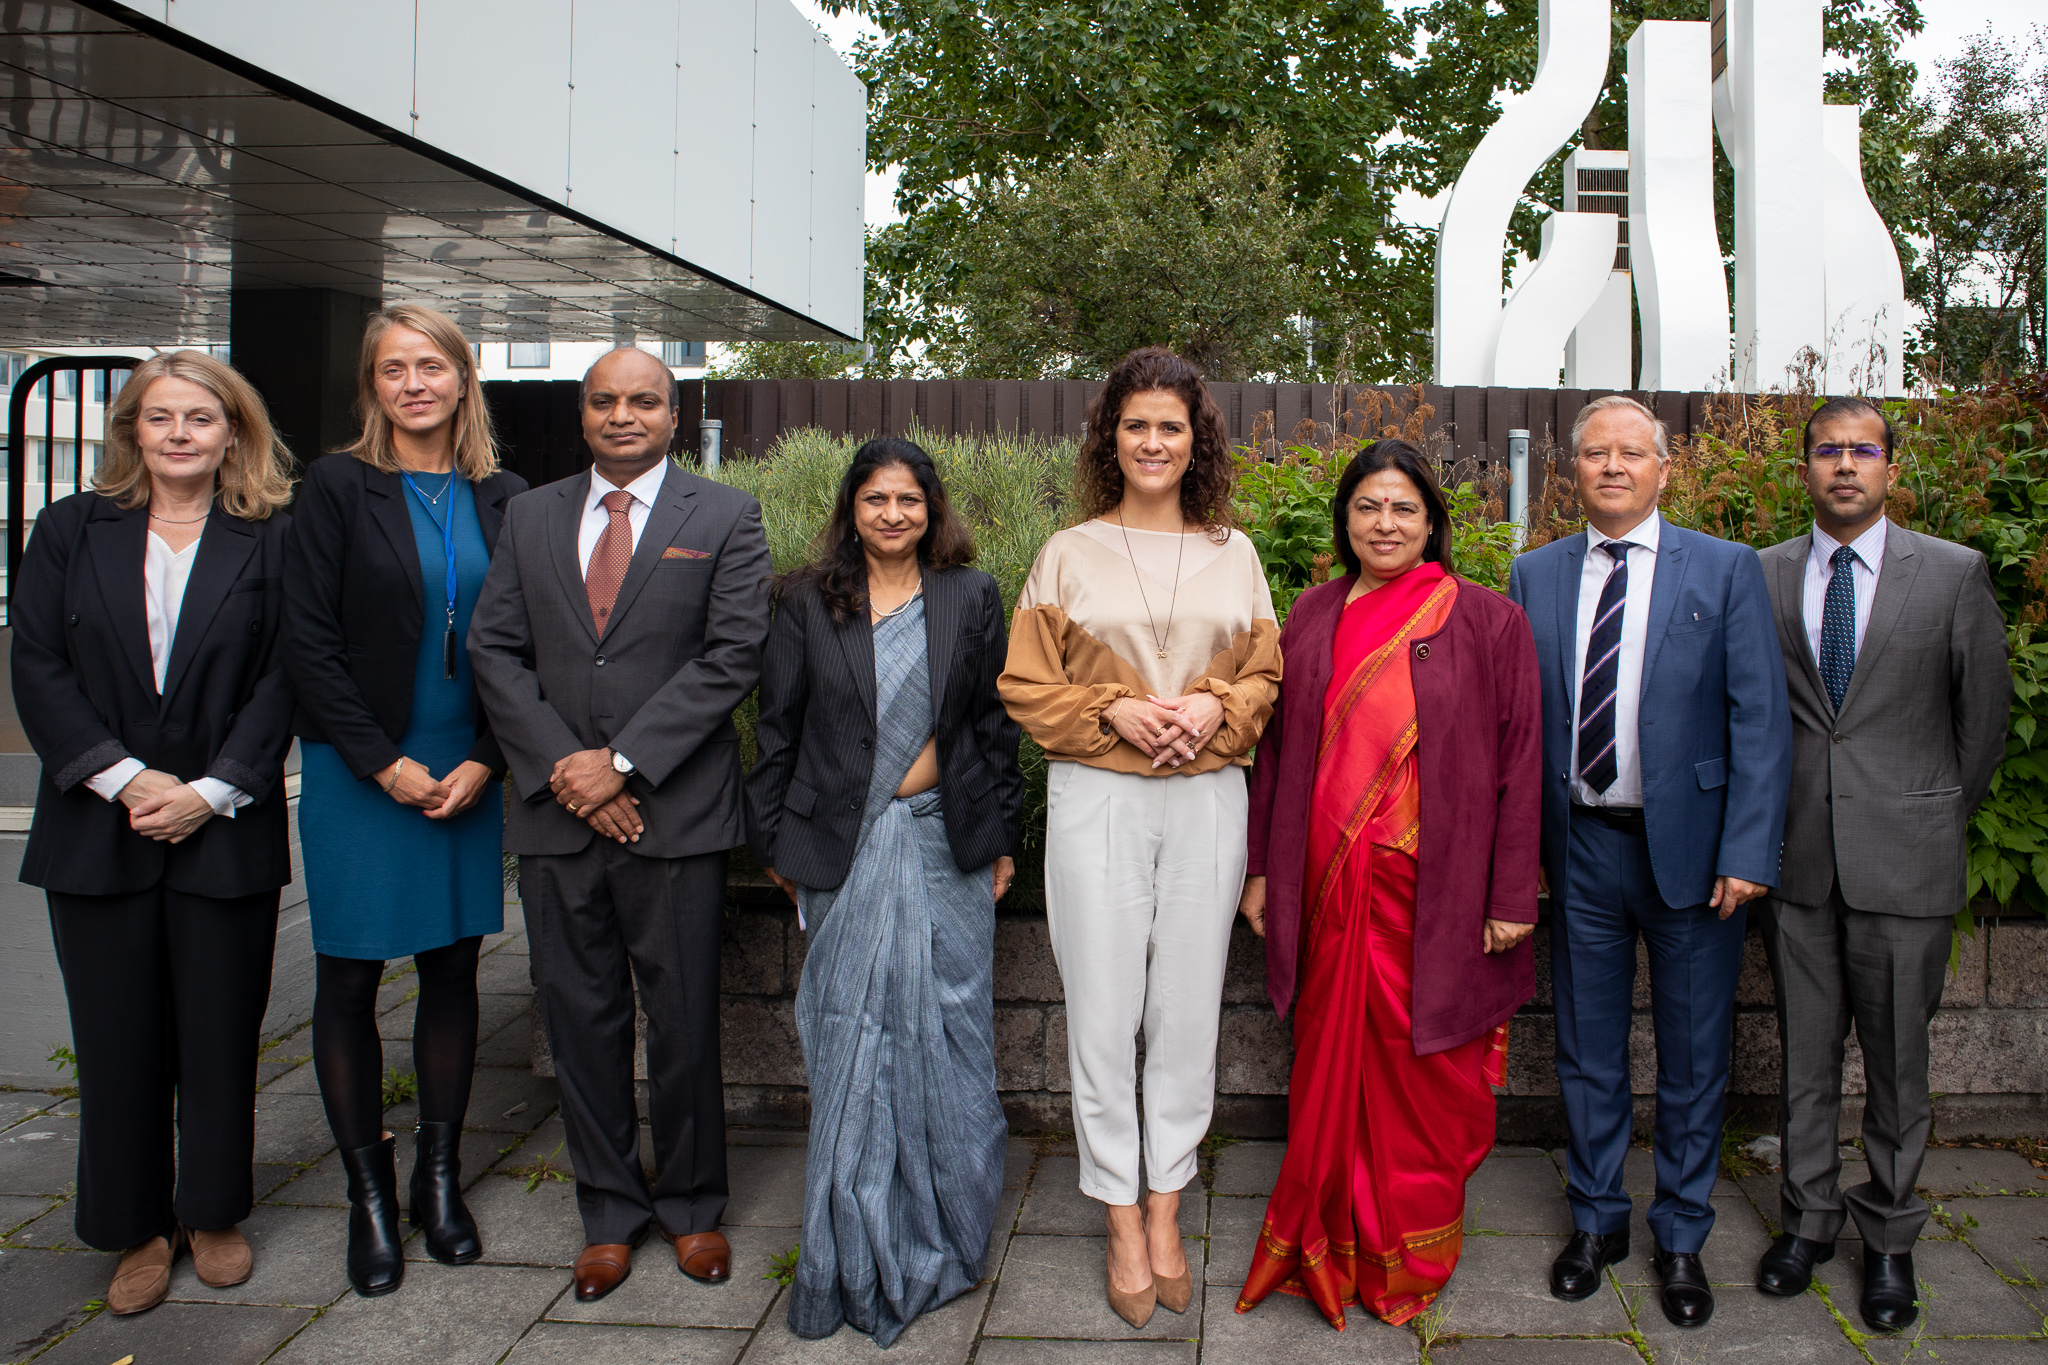  Minister of State for External Affairs and Culture Smt. Meenakashi Lekhi met Icelandic Foreign Minister Ms. Thórdís Kolbrún Reykfjörd Gylfadóttir on the occasion of 50th anniversary of diplomatic ties between India and Iceland, 19 August 2022